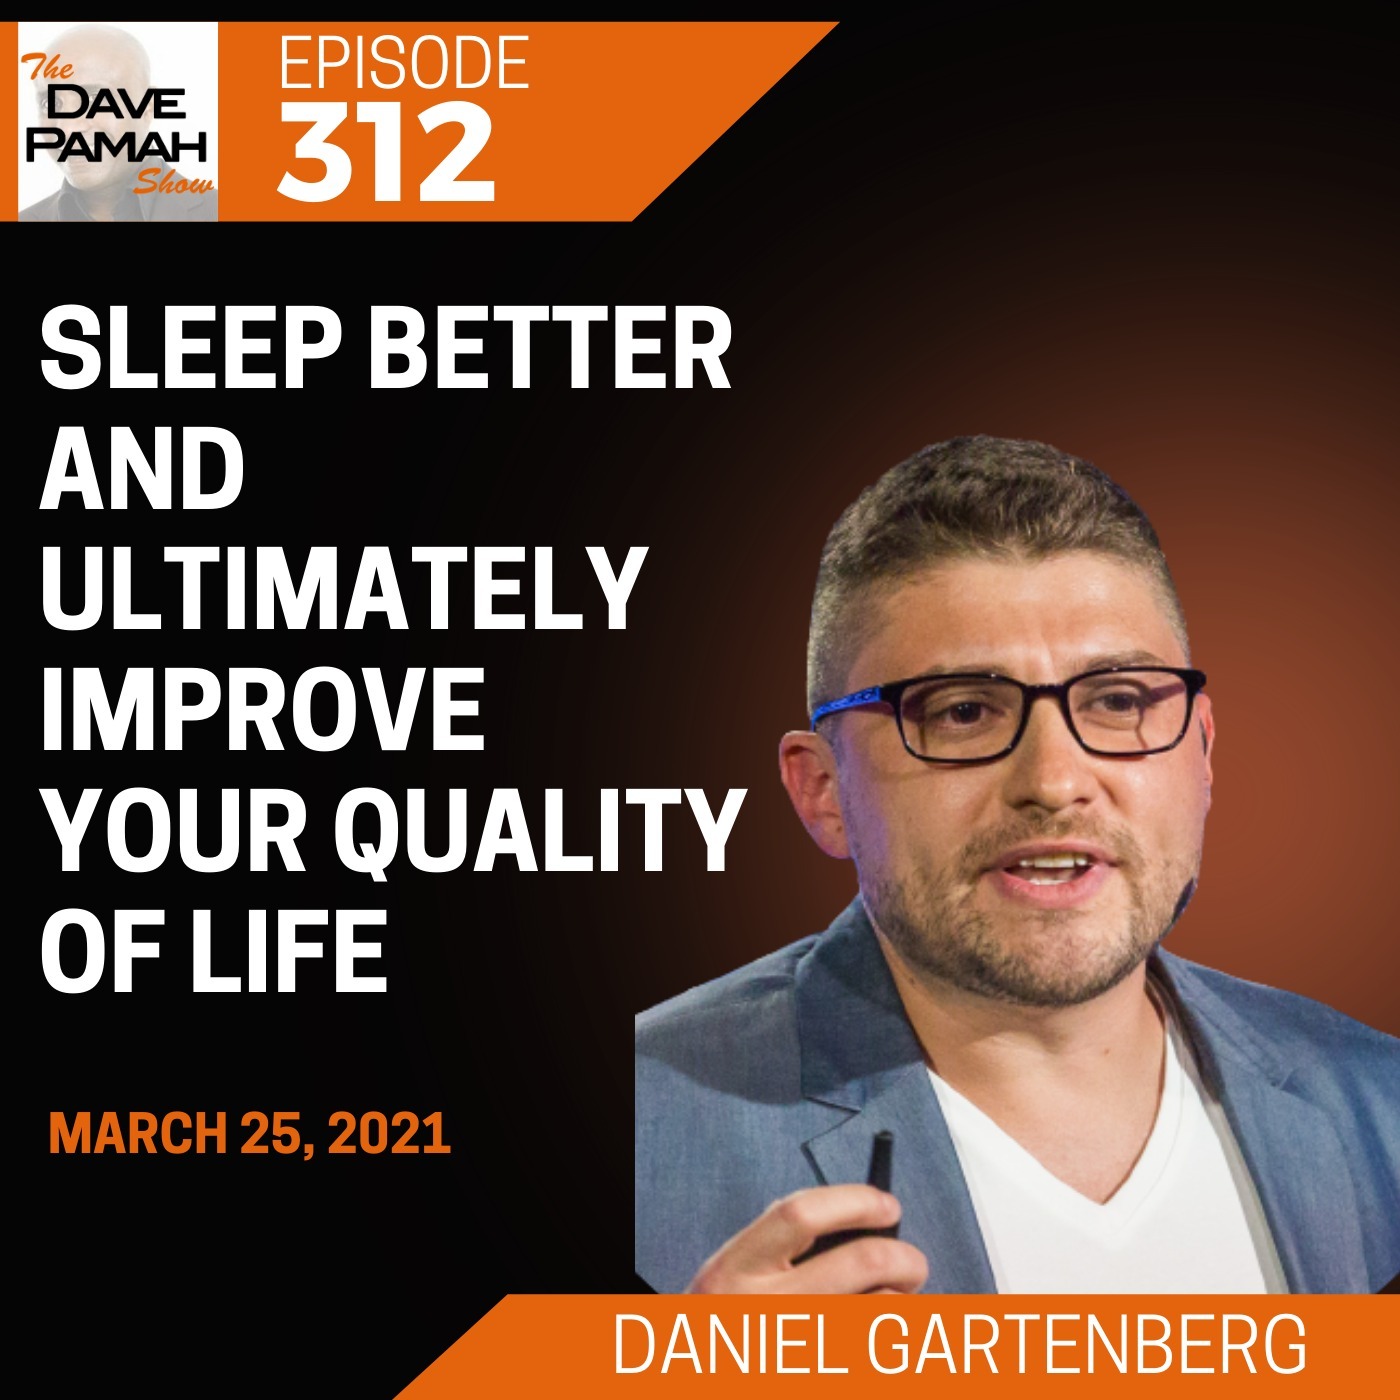 Sleep better and ultimately improve your quality of life with Daniel Gartenberg